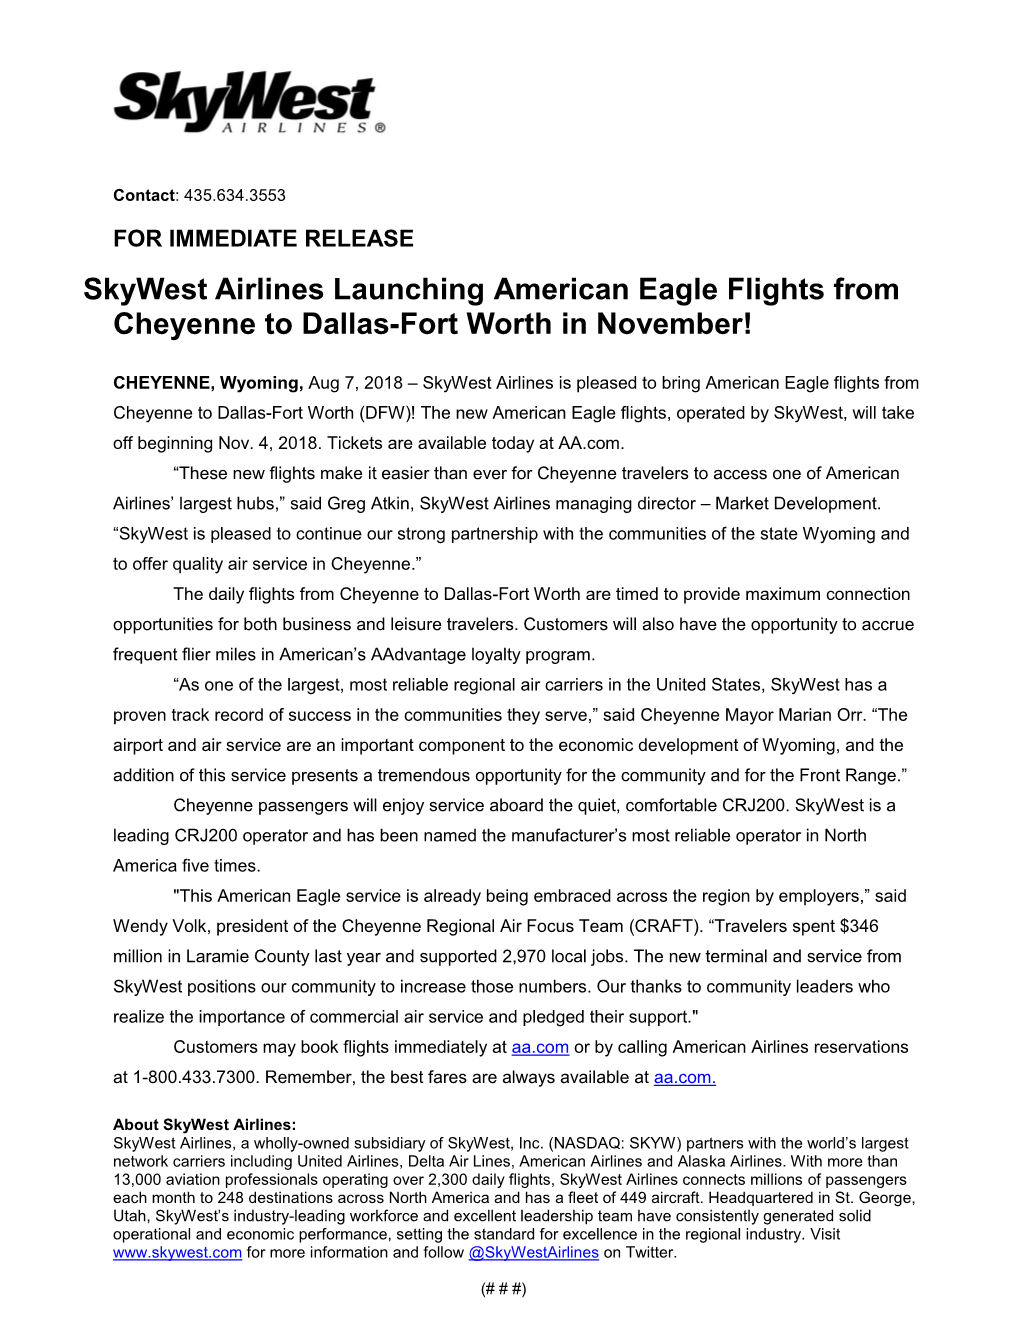 Skywest Airlines Launching American Eagle Flights from Cheyenne to Dallas-Fort Worth in November!